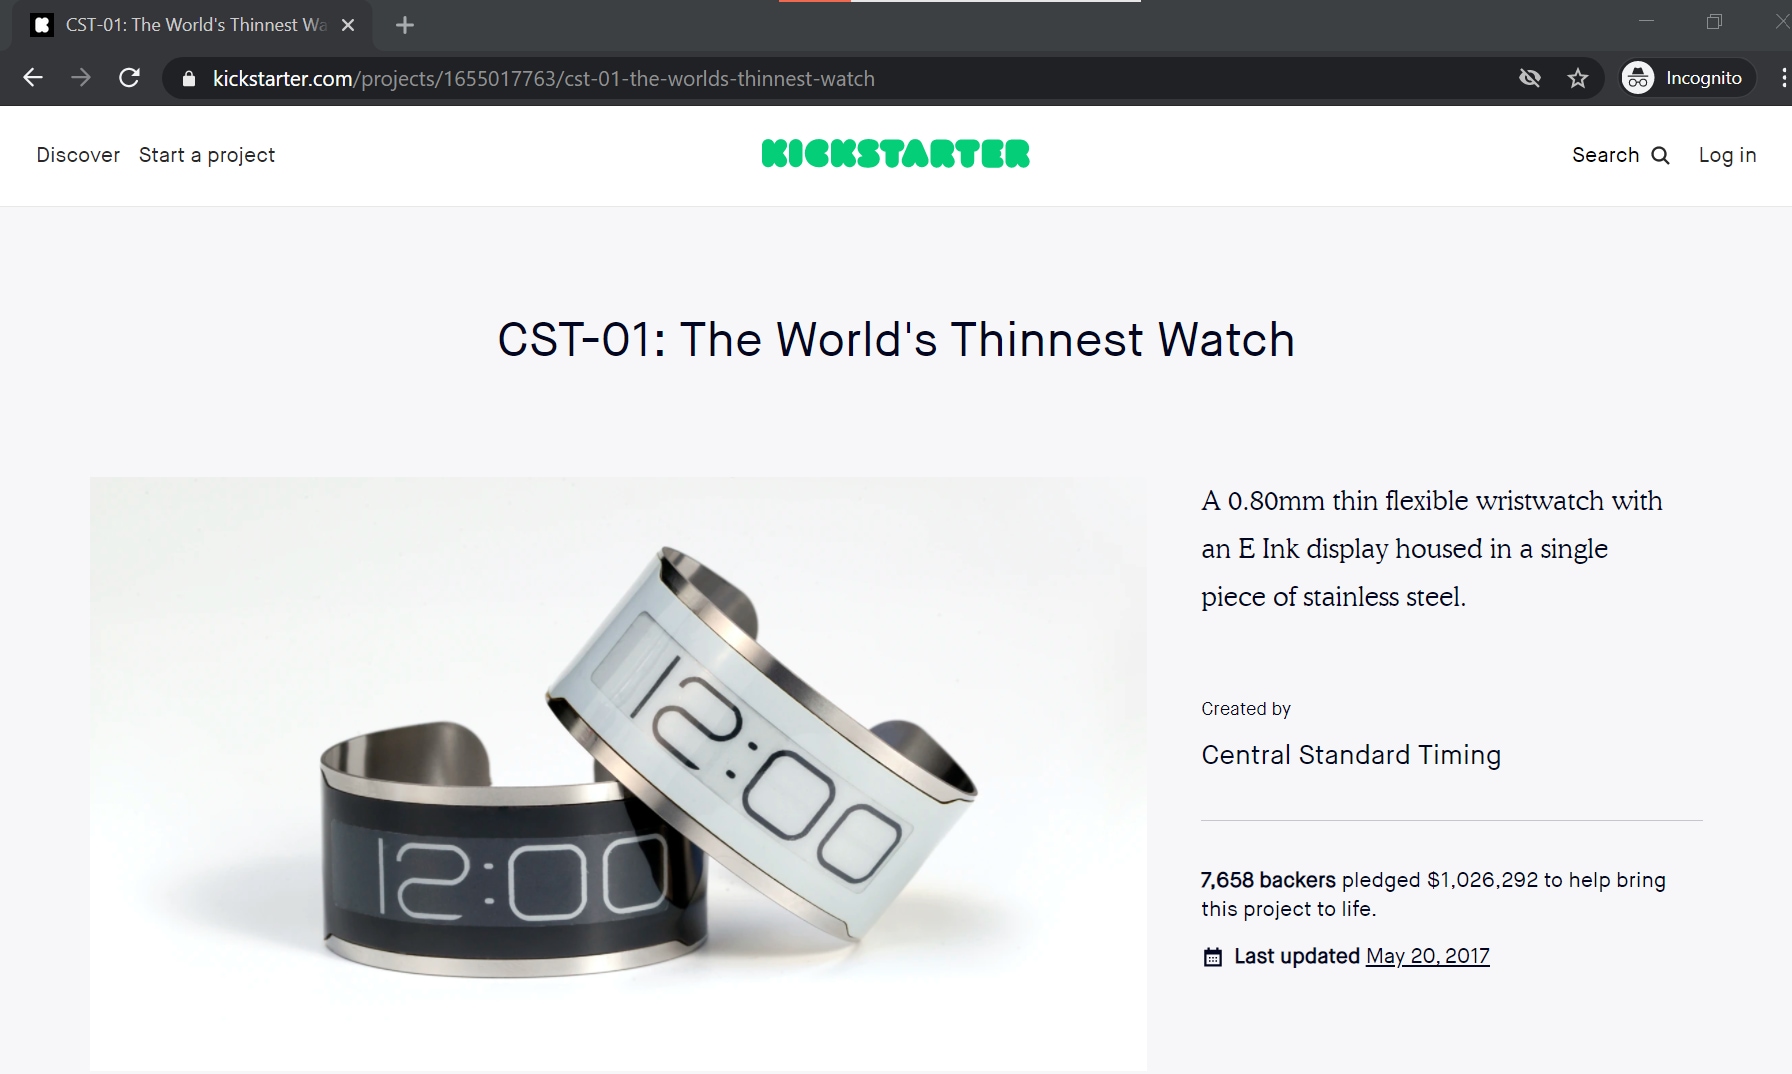 The thinnest watch demo